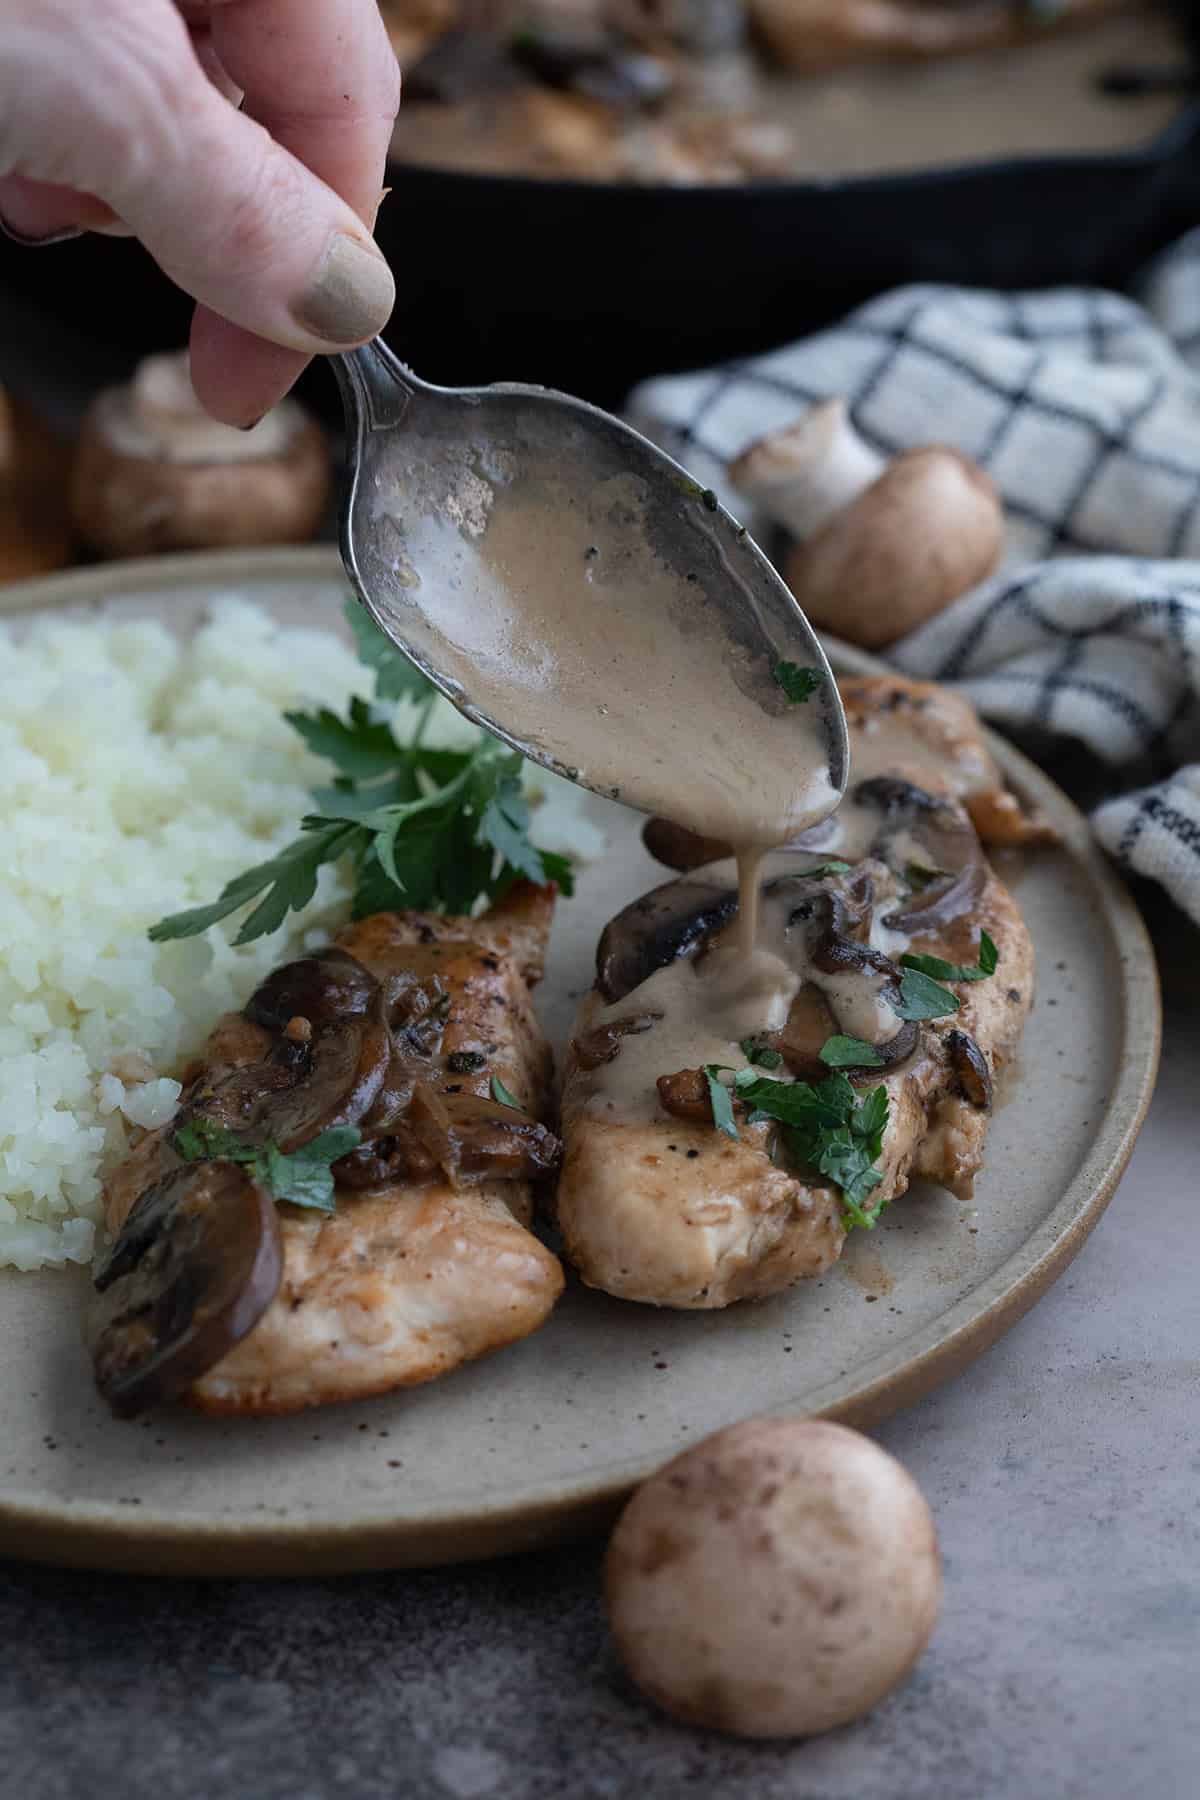 A spoon drizzling marsala sauce over chicken on a plate.